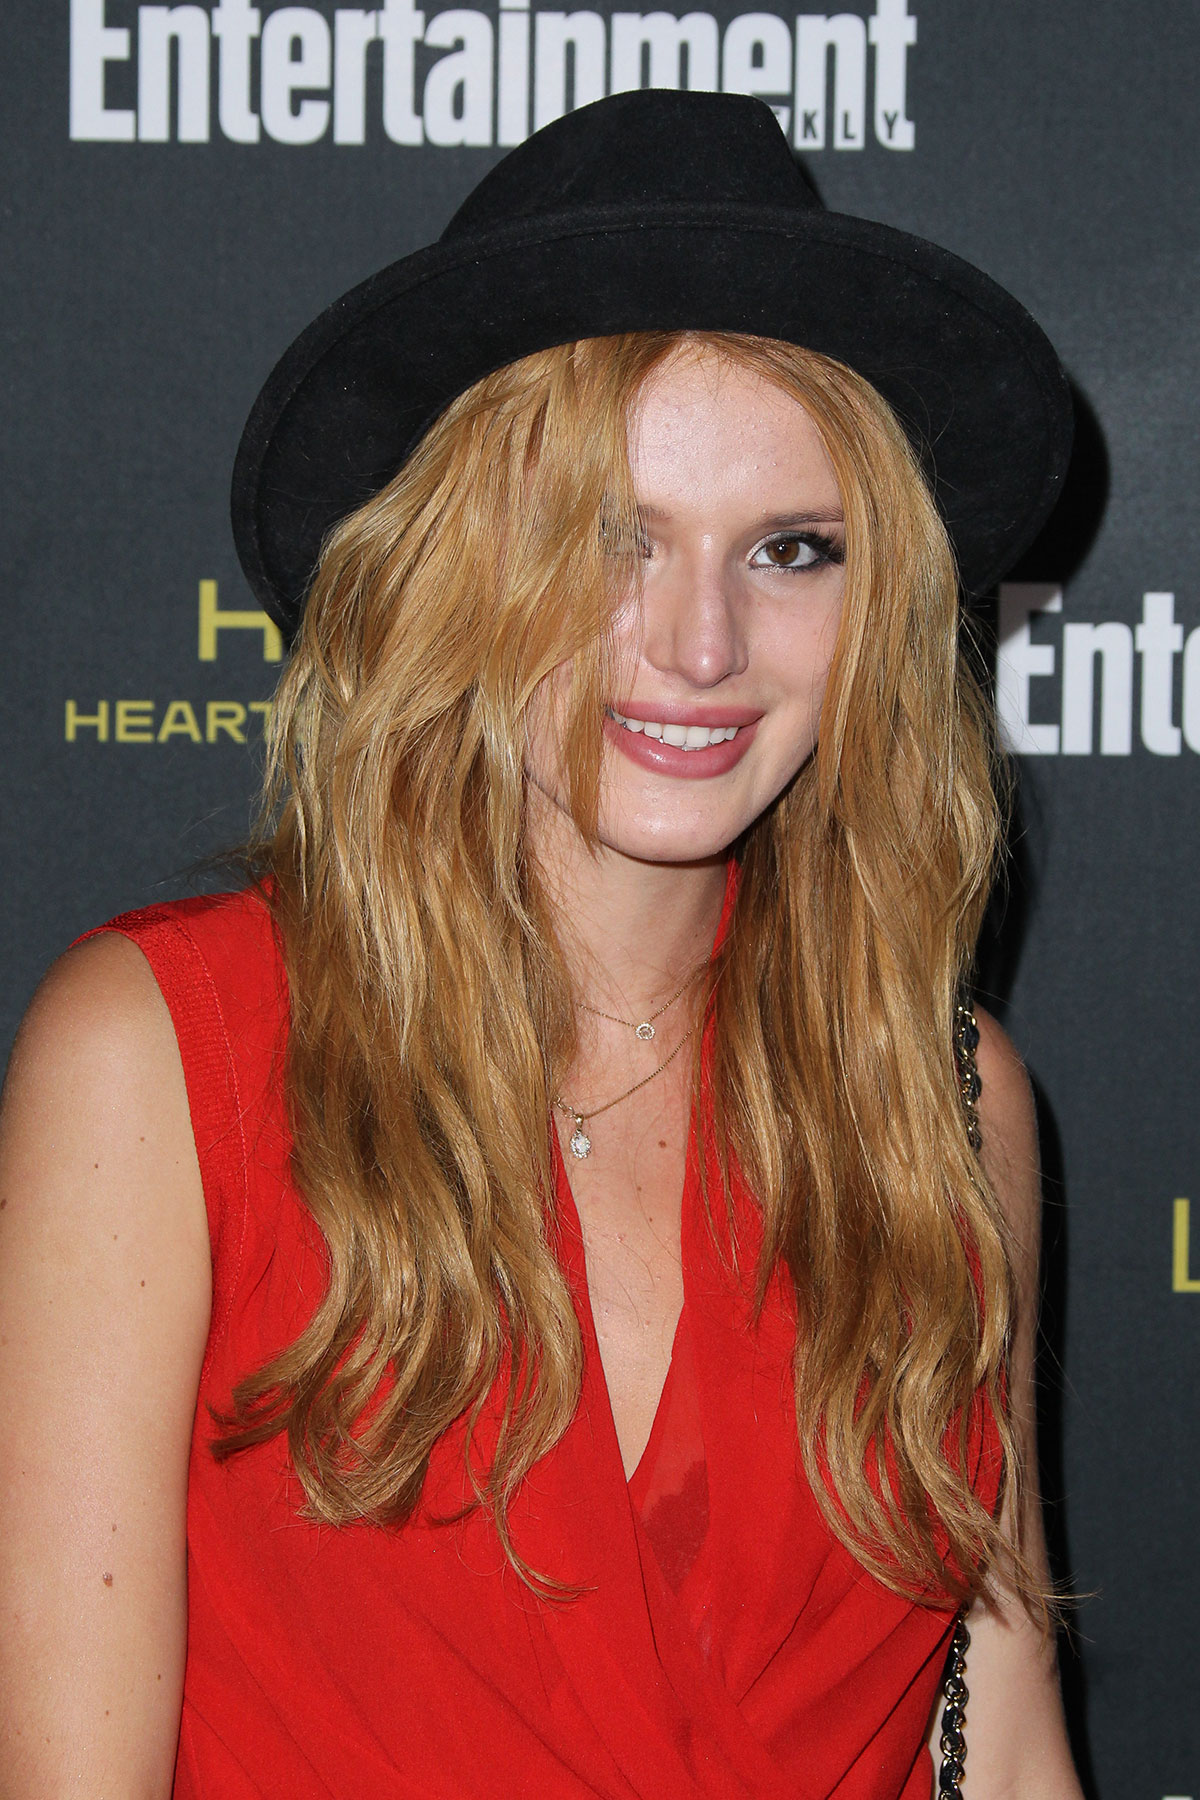 Bella Thorne attends Entertainment Weekly Pre-Emmy Party